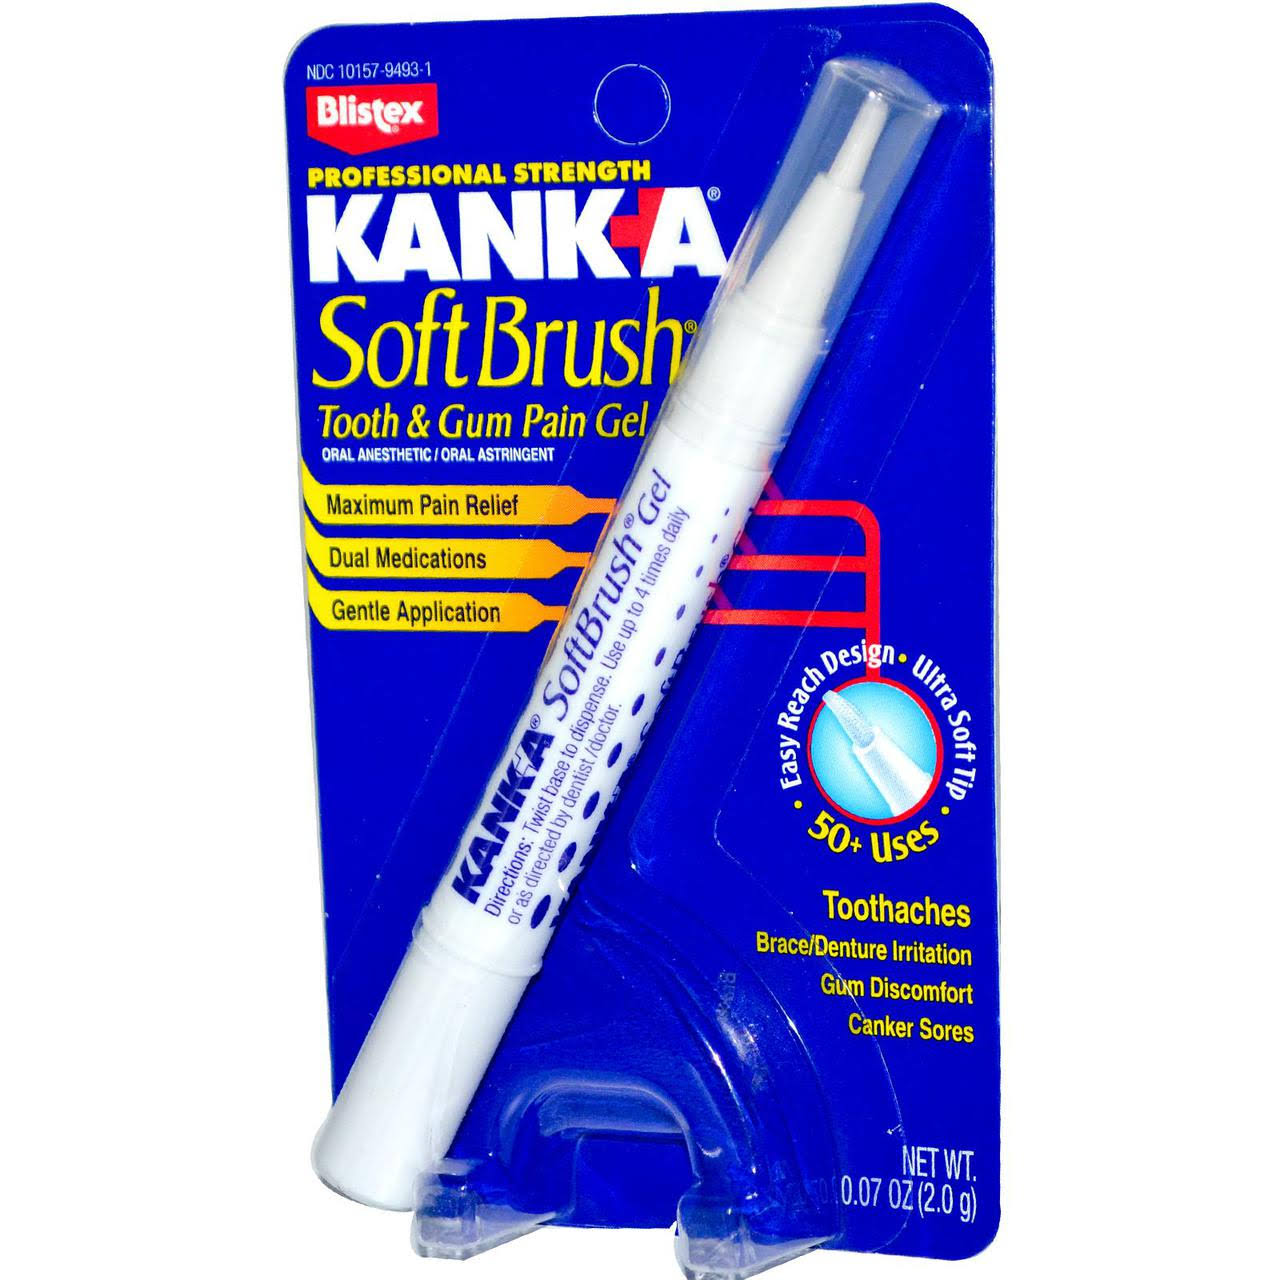 Blistex Kanka Soft Brush Tooth and Mouth Pain Gel - Professional Strength , 2g, Pack of 3